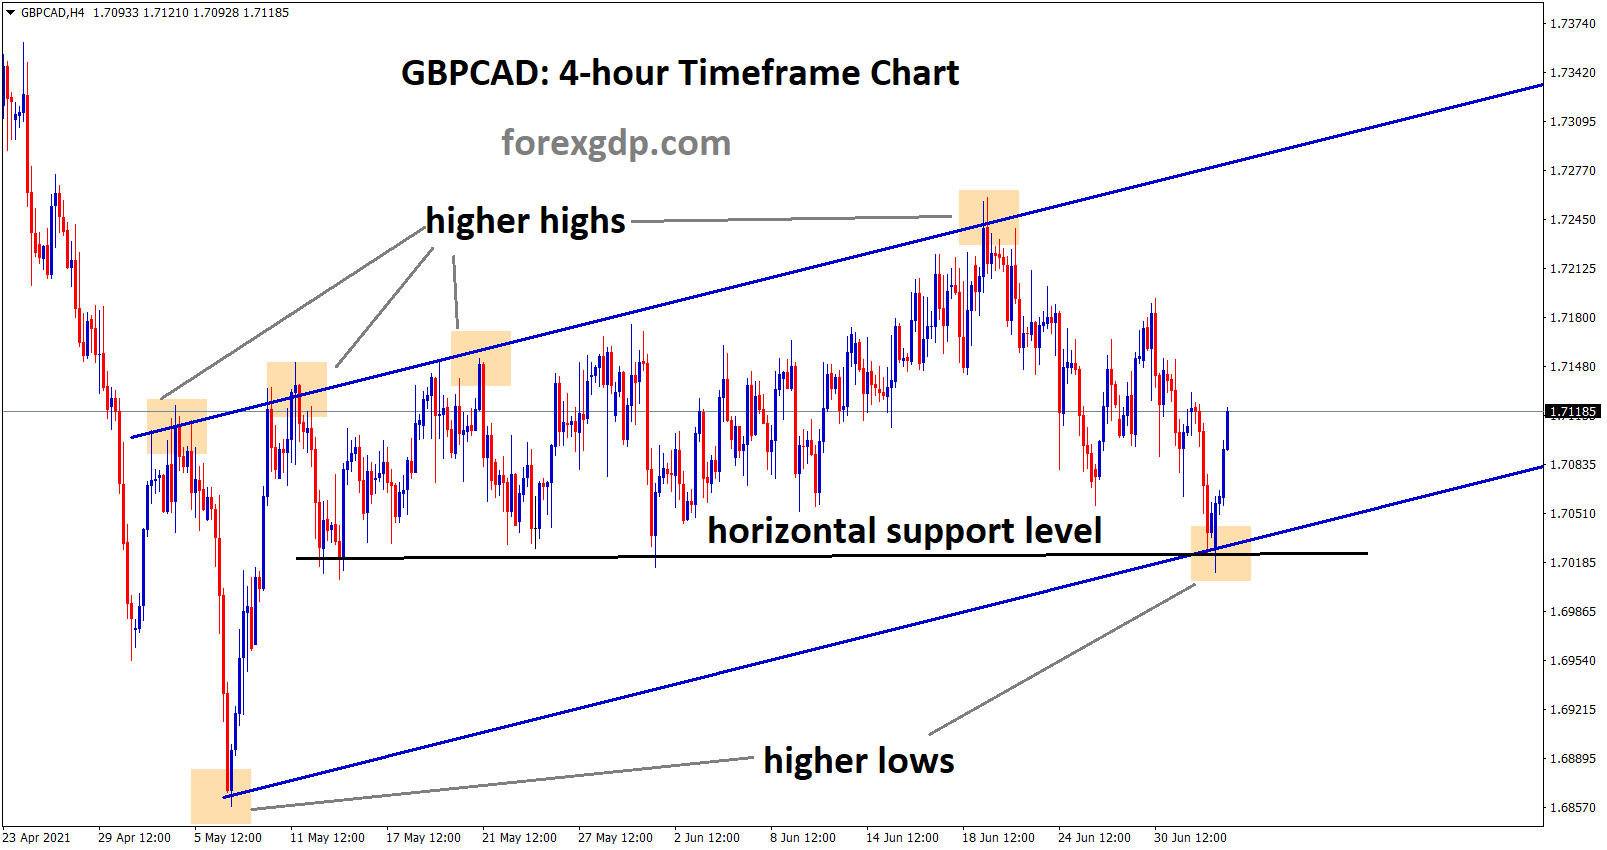 gbpcad bouncing back from the higher low and horizontal support line